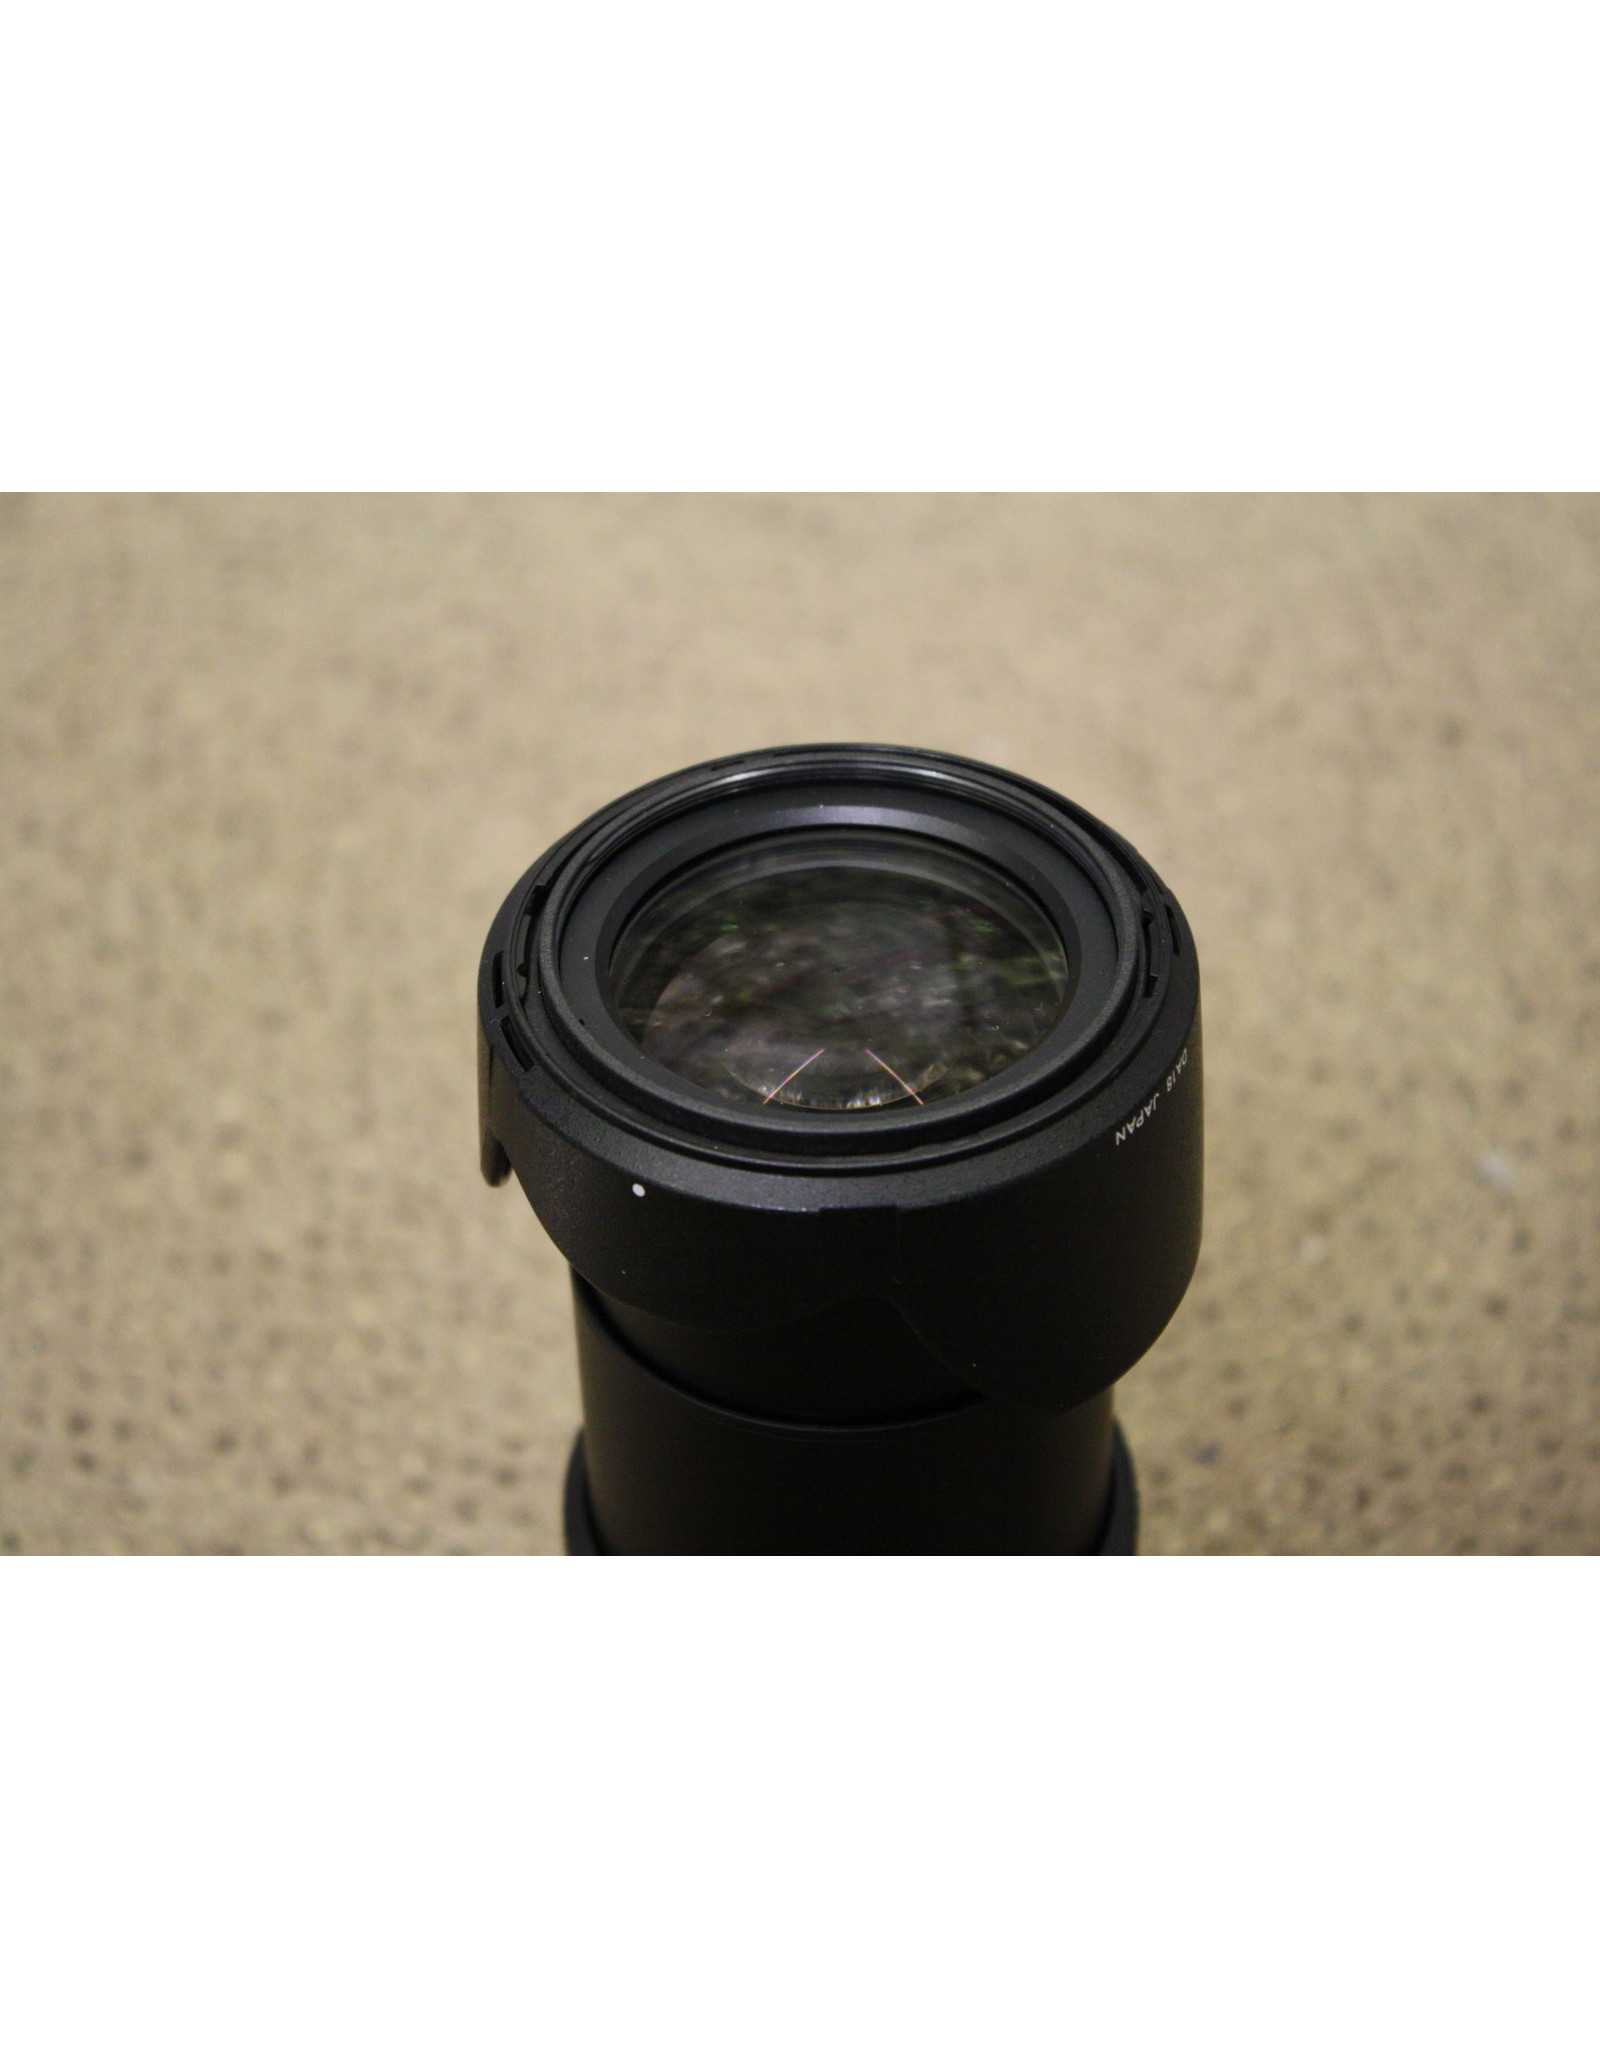 Tamron 18-250mm f3.5-6.3 for Pentax Digital (Pre-owned)